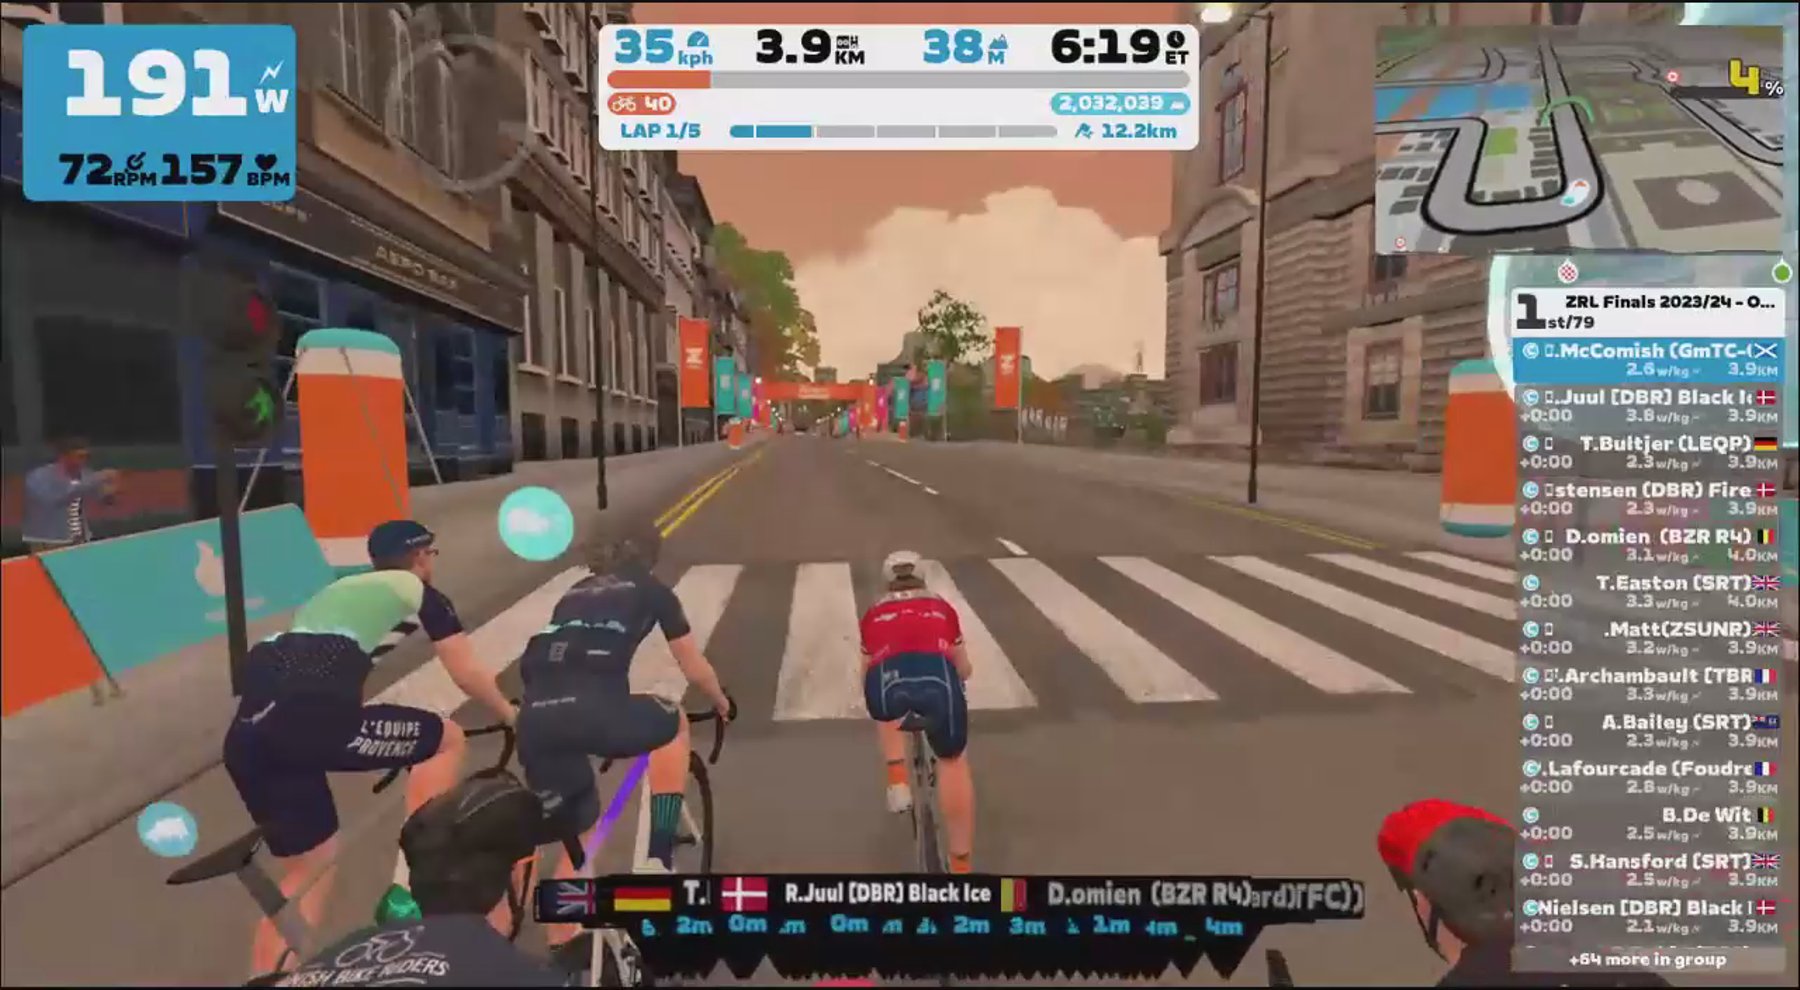 Zwift - Race: ZRL Finals 2023/24 - Open EMEAW Division 1 - Cup Final (Part2) (C) on Glasgow Reverse in Scotland